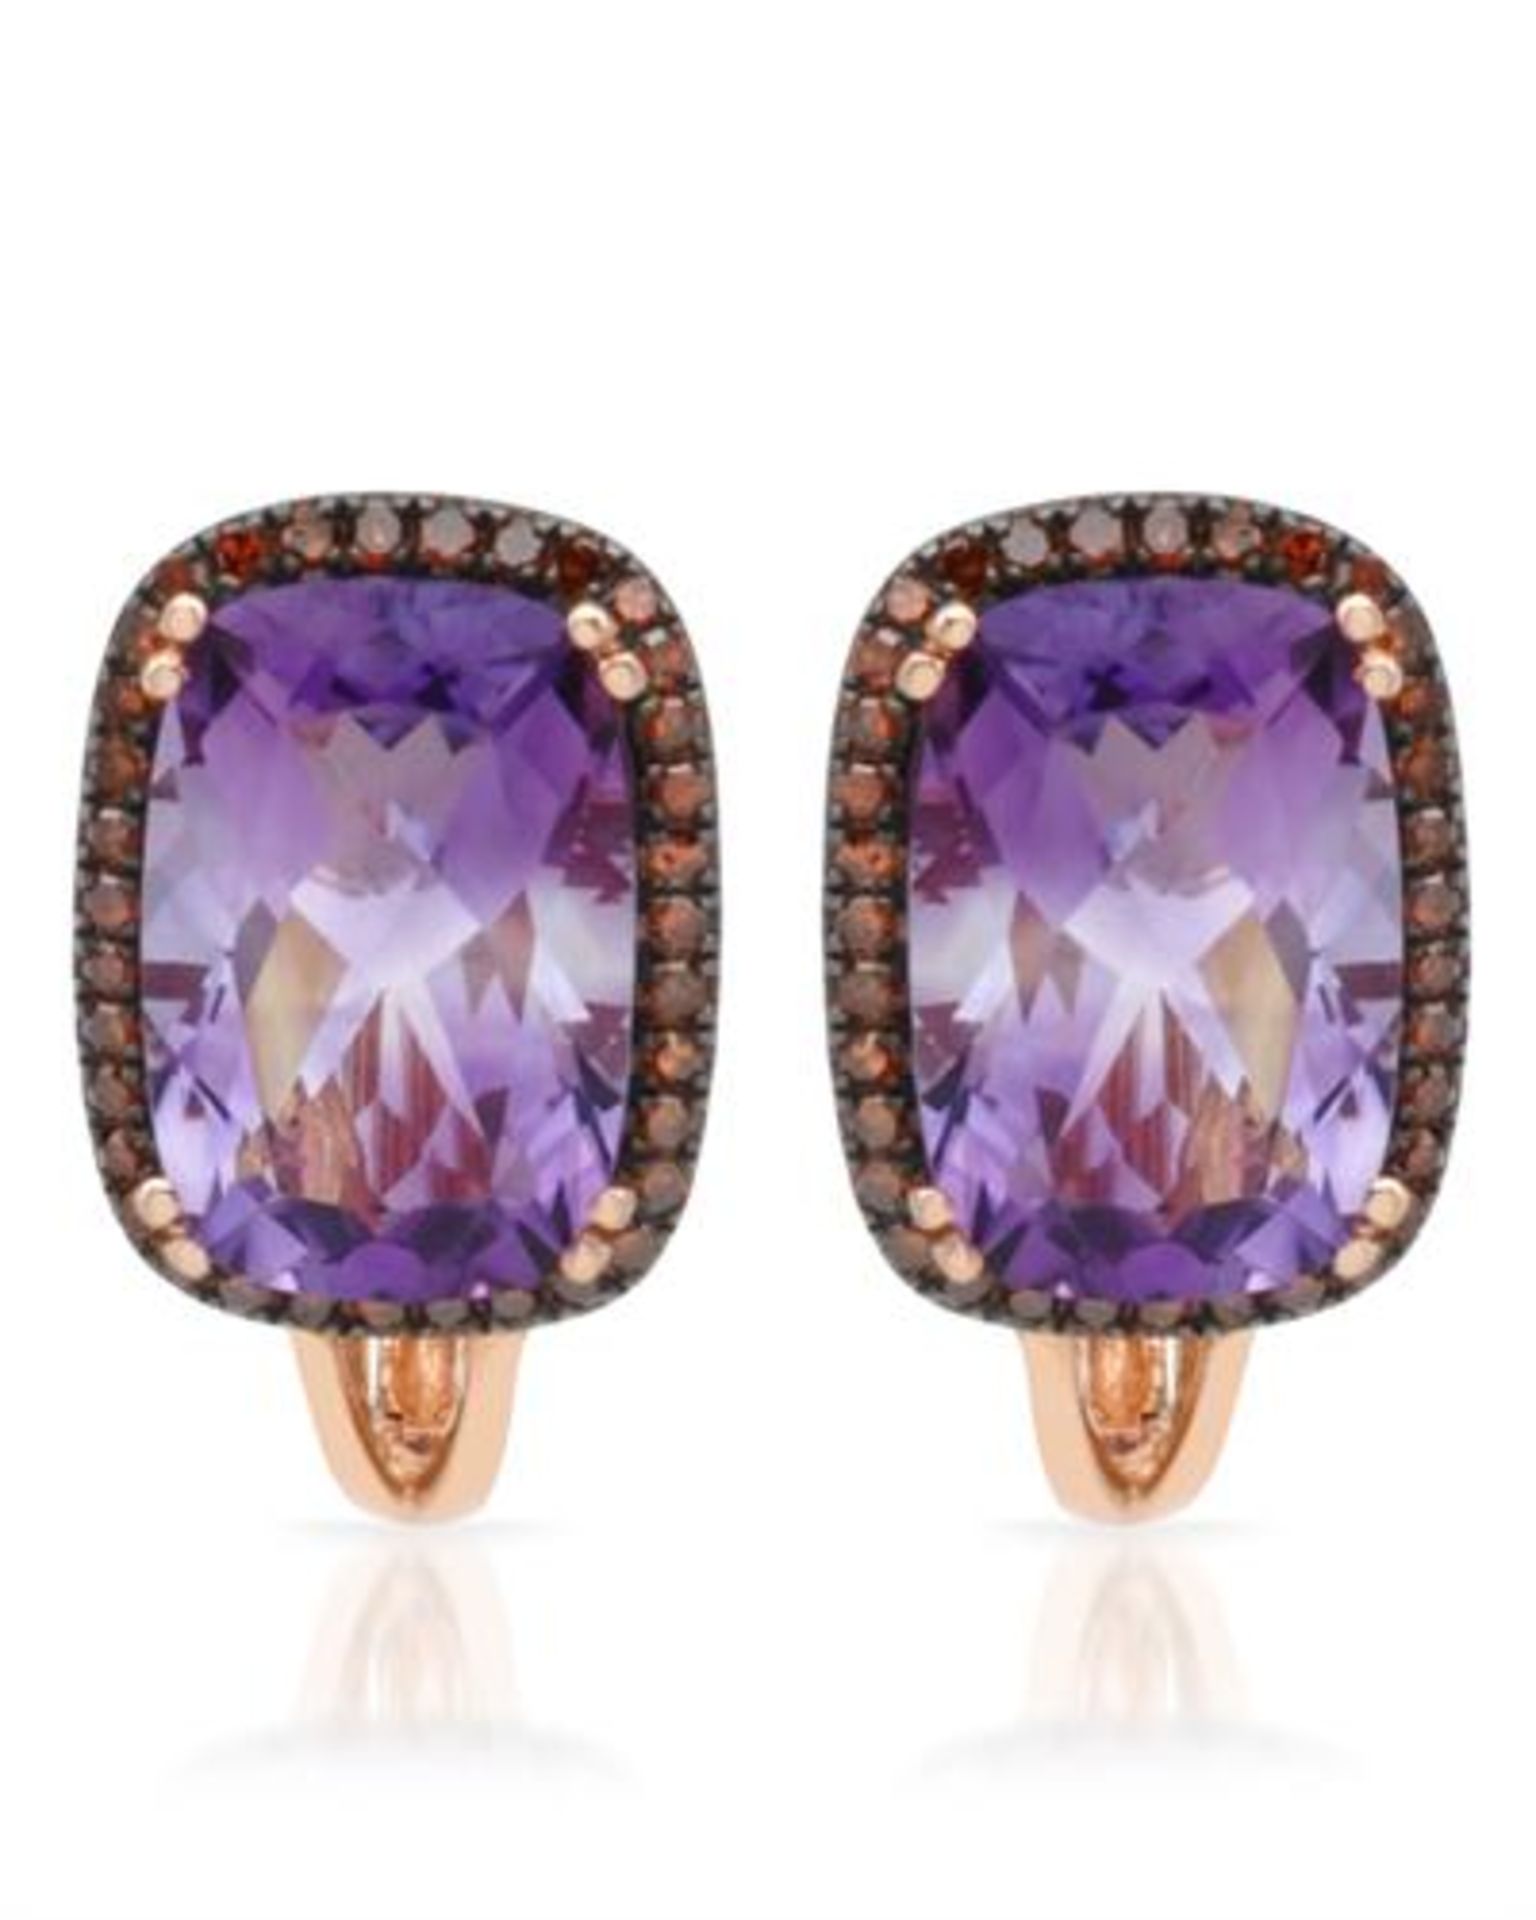 14k Rose Gold 7.10 ctw Amethys and Diamond Earrings - Image 2 of 2